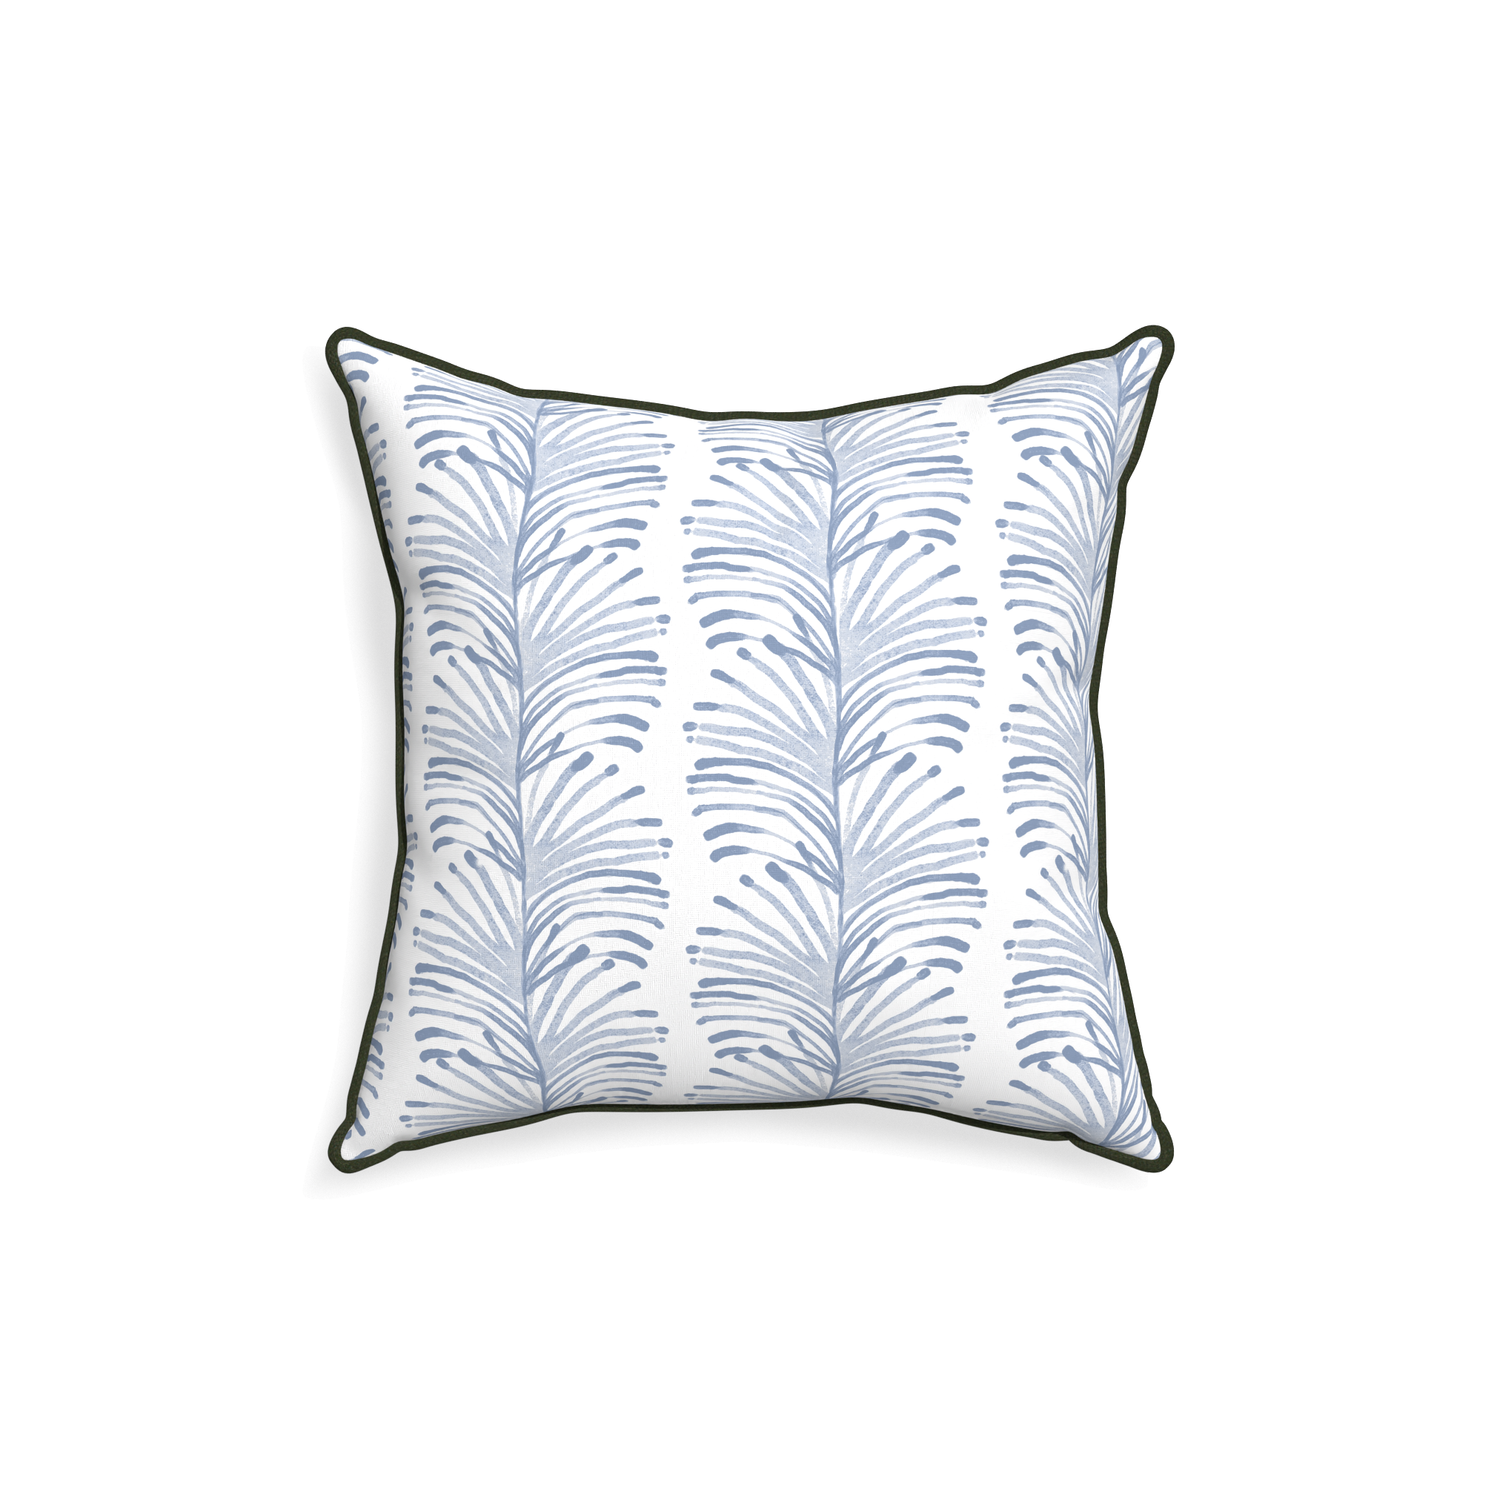 18-square emma sky custom sky blue botanical stripepillow with f piping on white background